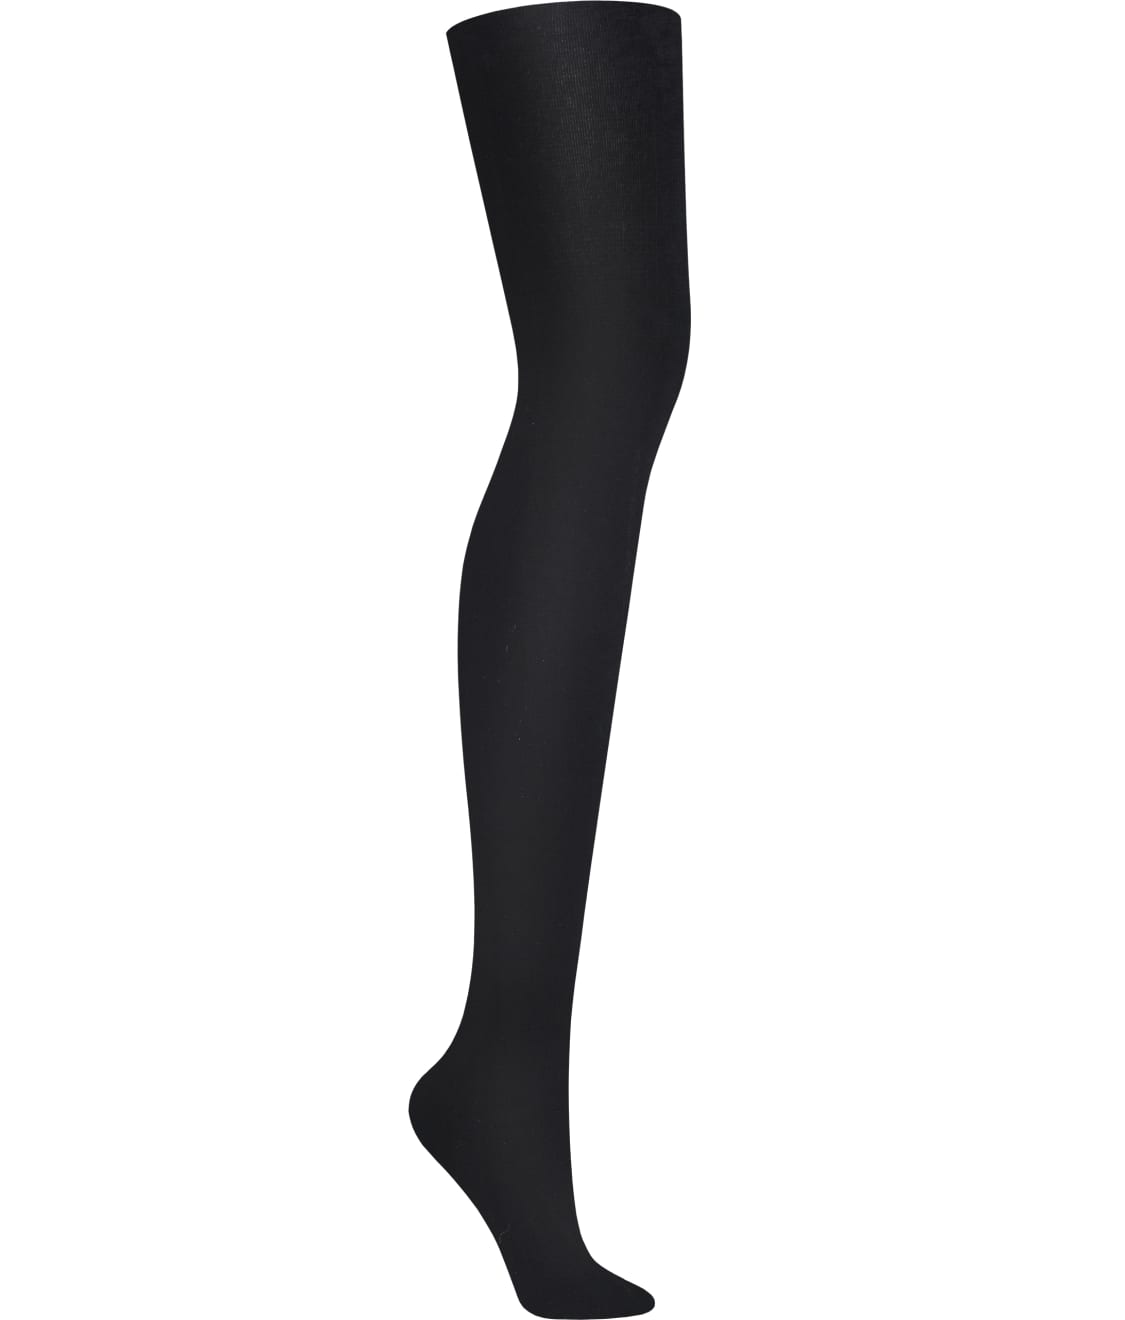 Dkny Skin Sense Fleece Tights And Reviews Bare Necessities Style Dyf004